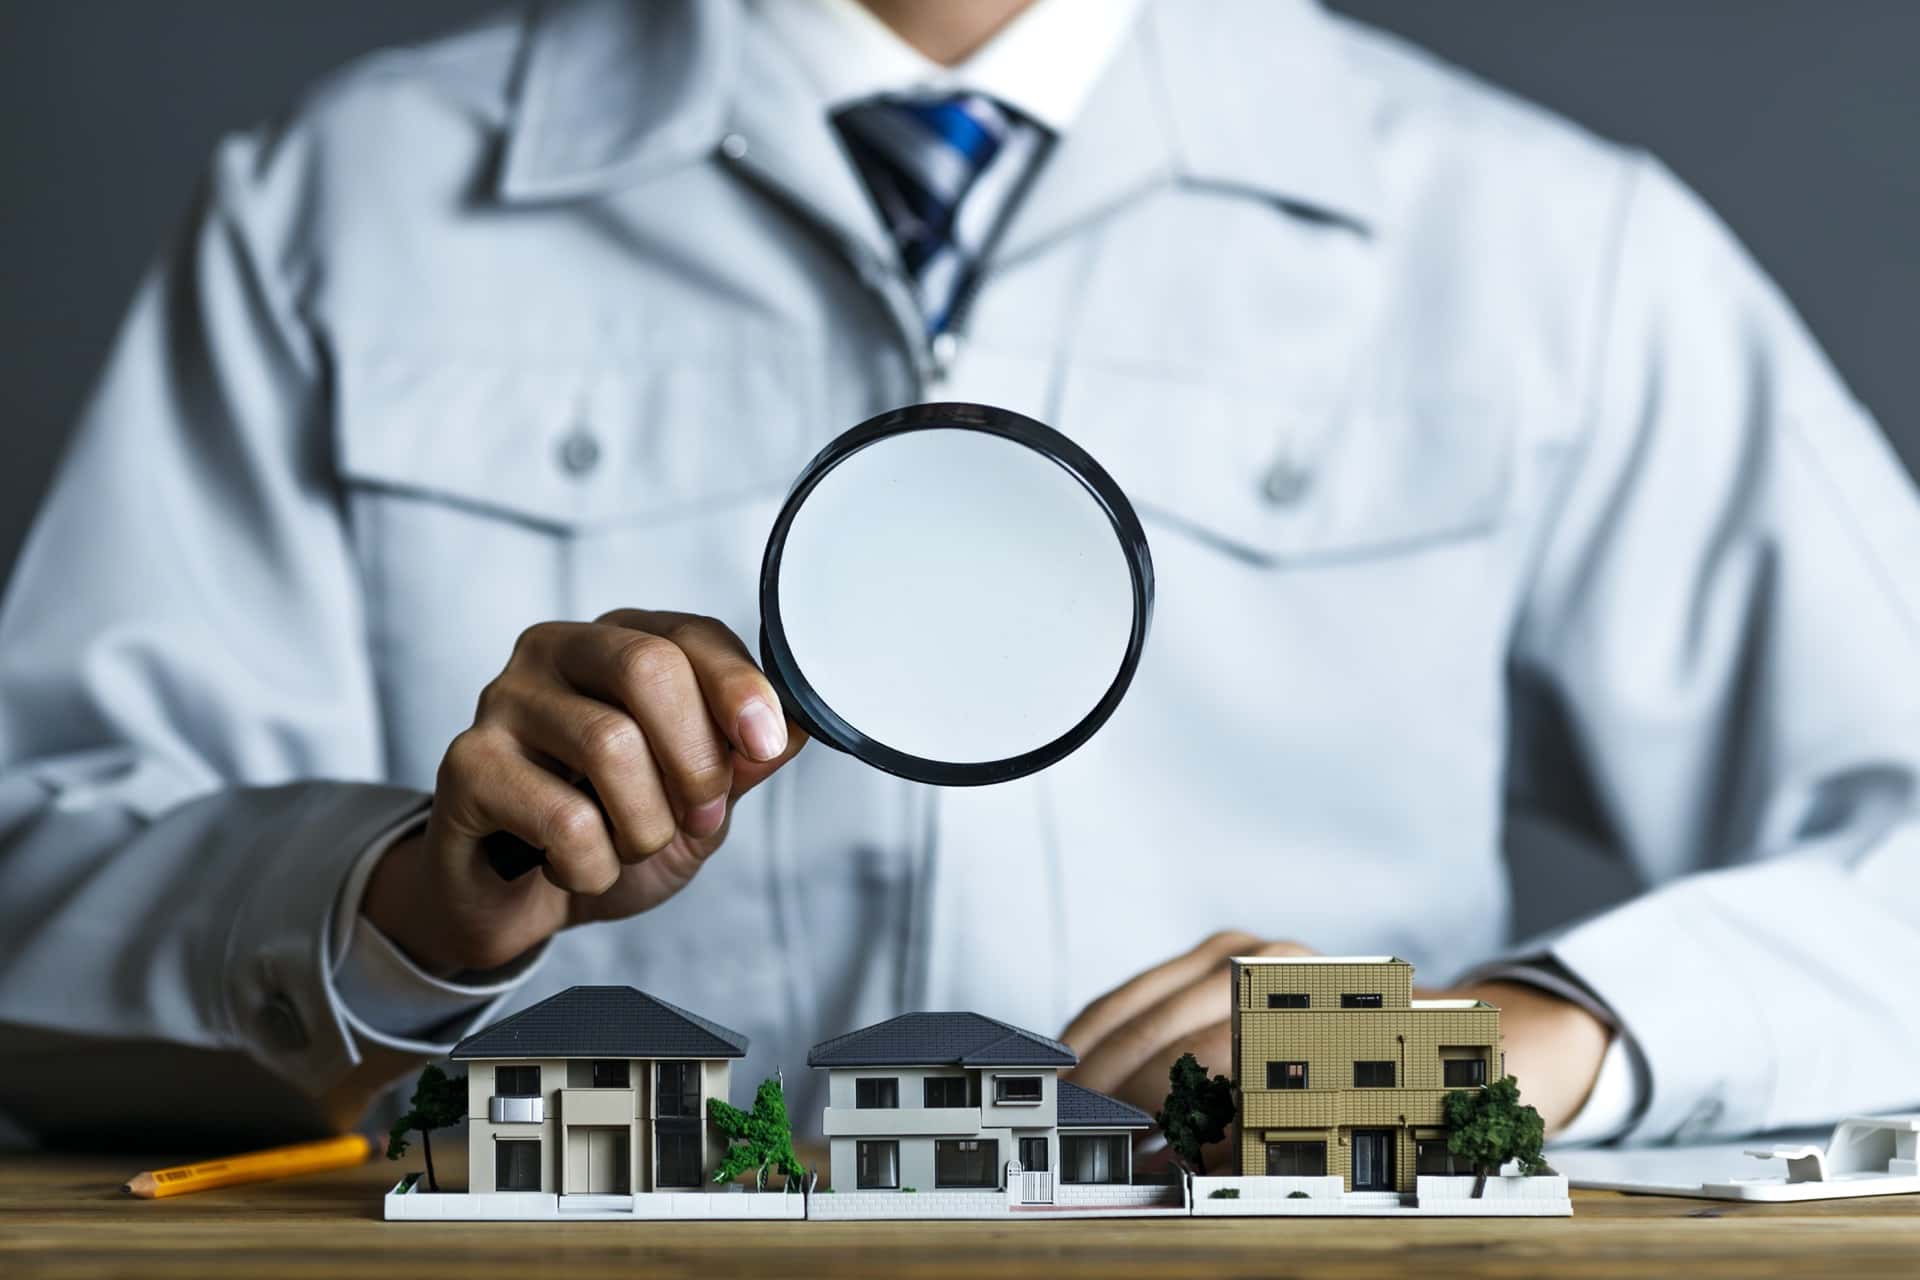 A man in white coat holding magnifying glass up to small model homes